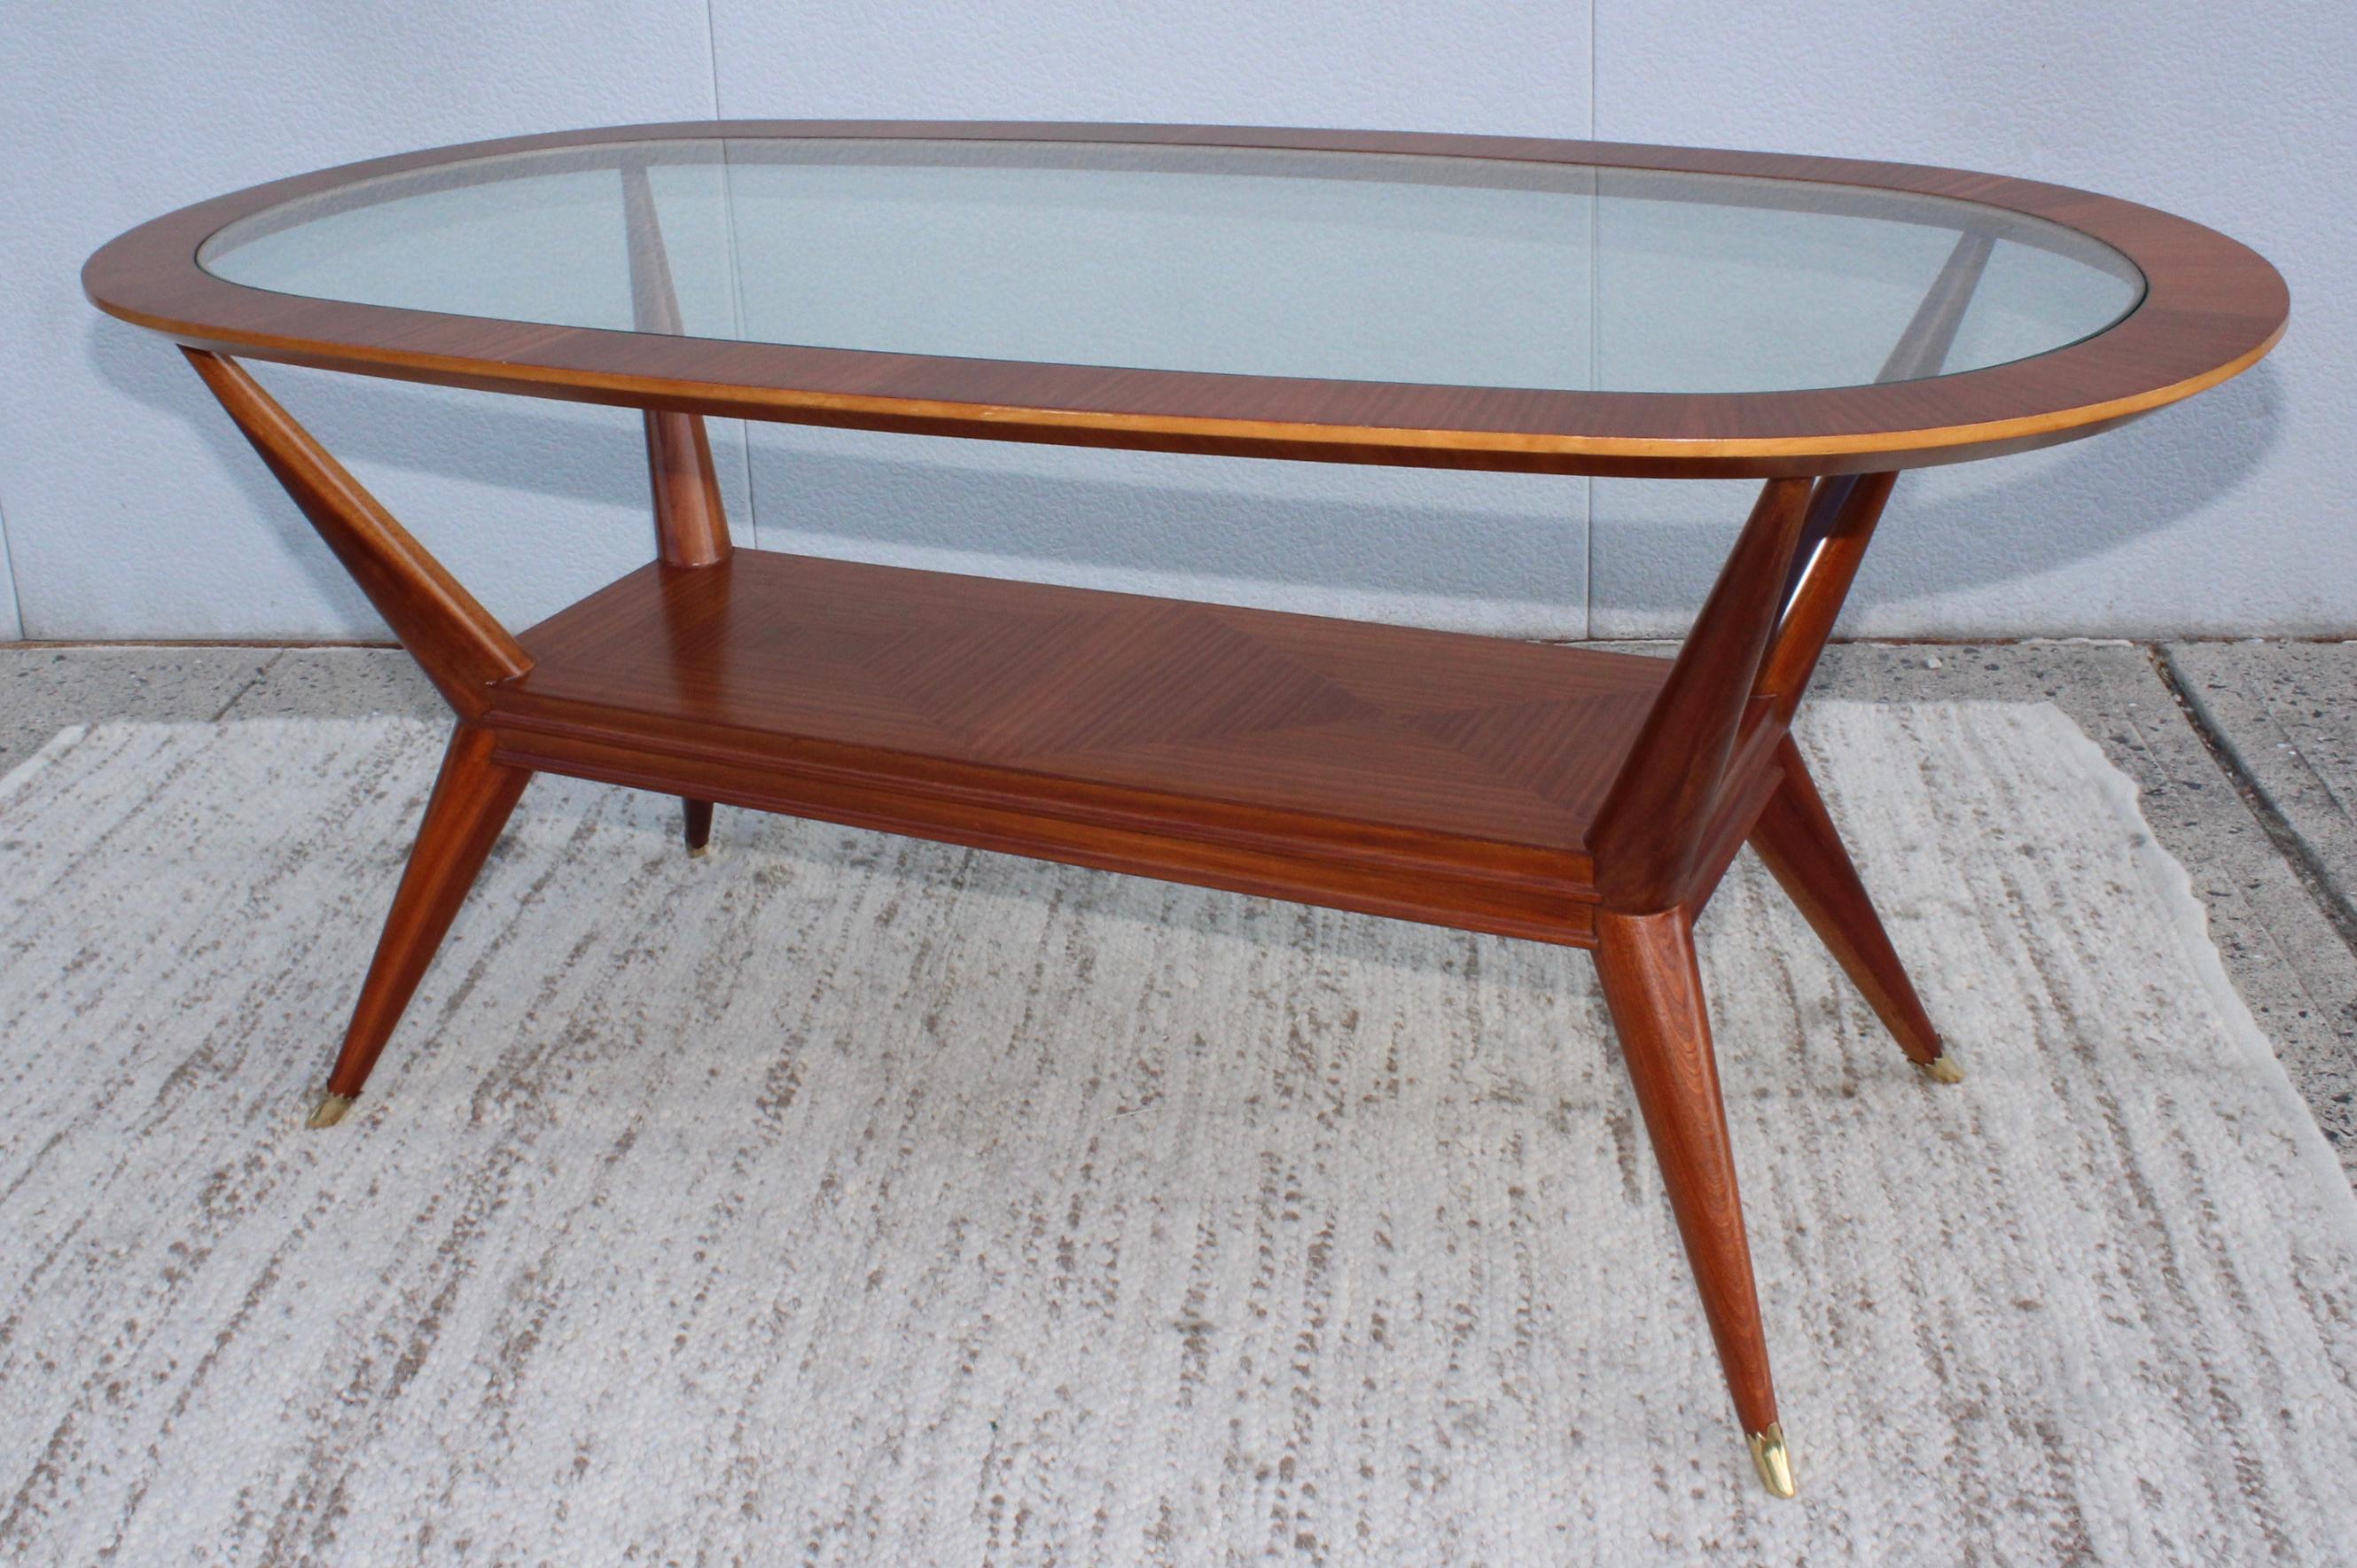 Stunning 1950s Mid-Century Modern Vittorio Dassi attributed sculptural walnut oval dining table/desk with brass sabots, lightly restored with minor wear sand patina.